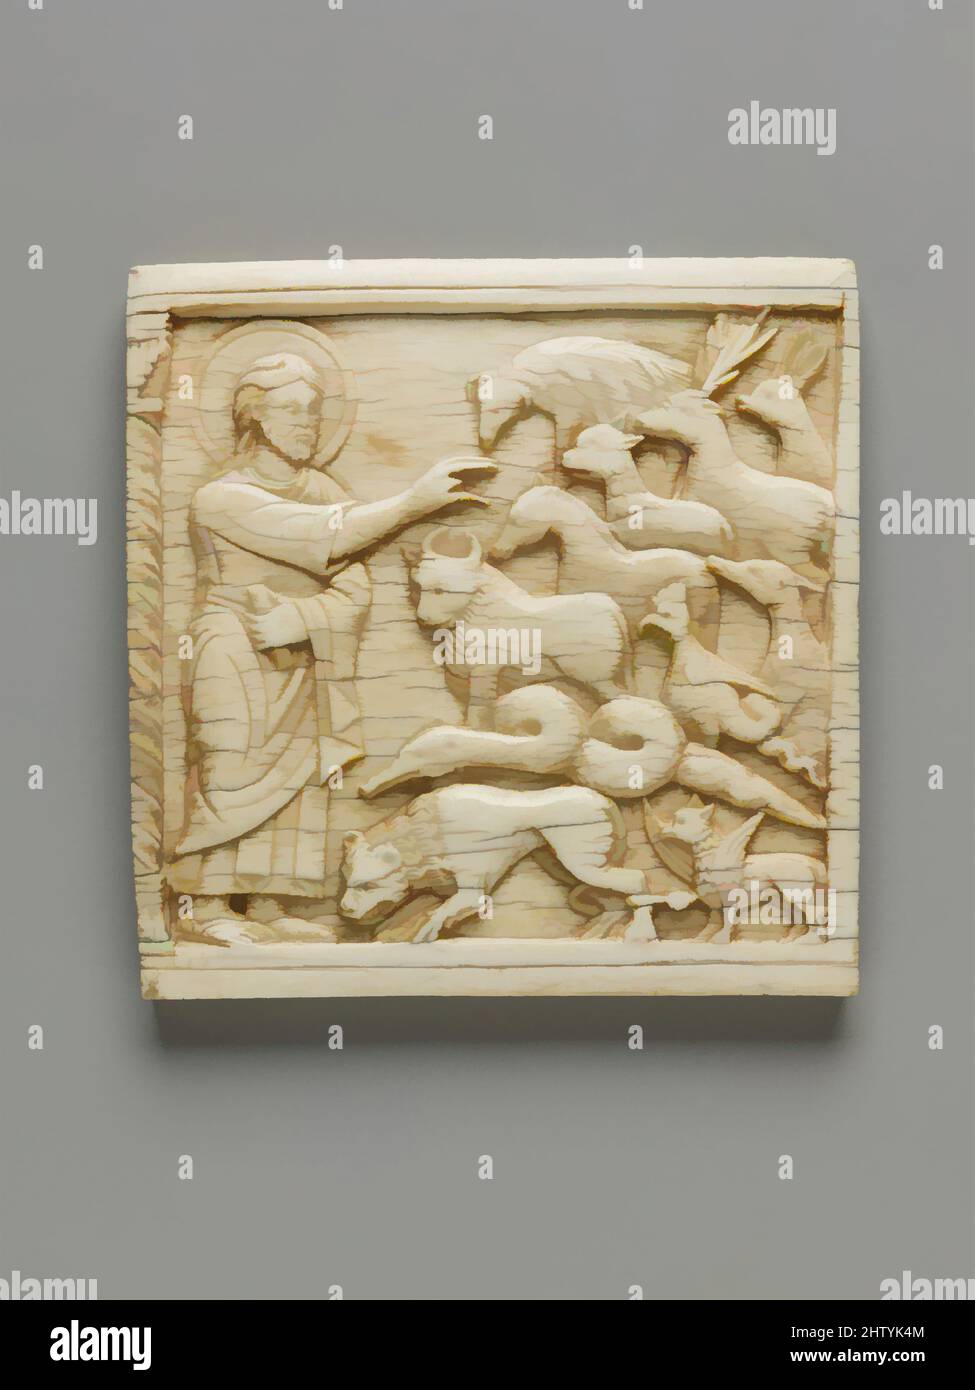 Art inspired by Plaque with God Creating the Animals, 1084, Made in Amalfi, South Italian, Ivory, Overall: 4 3/16 x 4 3/16 x 5/16 in. (10.7 x 10.6 x 0.8 cm), Ivories, From the Cathedral of Salerno, this plaque comes from a set of about fifty ivories depicting biblical scenes that may, Classic works modernized by Artotop with a splash of modernity. Shapes, color and value, eye-catching visual impact on art. Emotions through freedom of artworks in a contemporary way. A timeless message pursuing a wildly creative new direction. Artists turning to the digital medium and creating the Artotop NFT Stock Photo